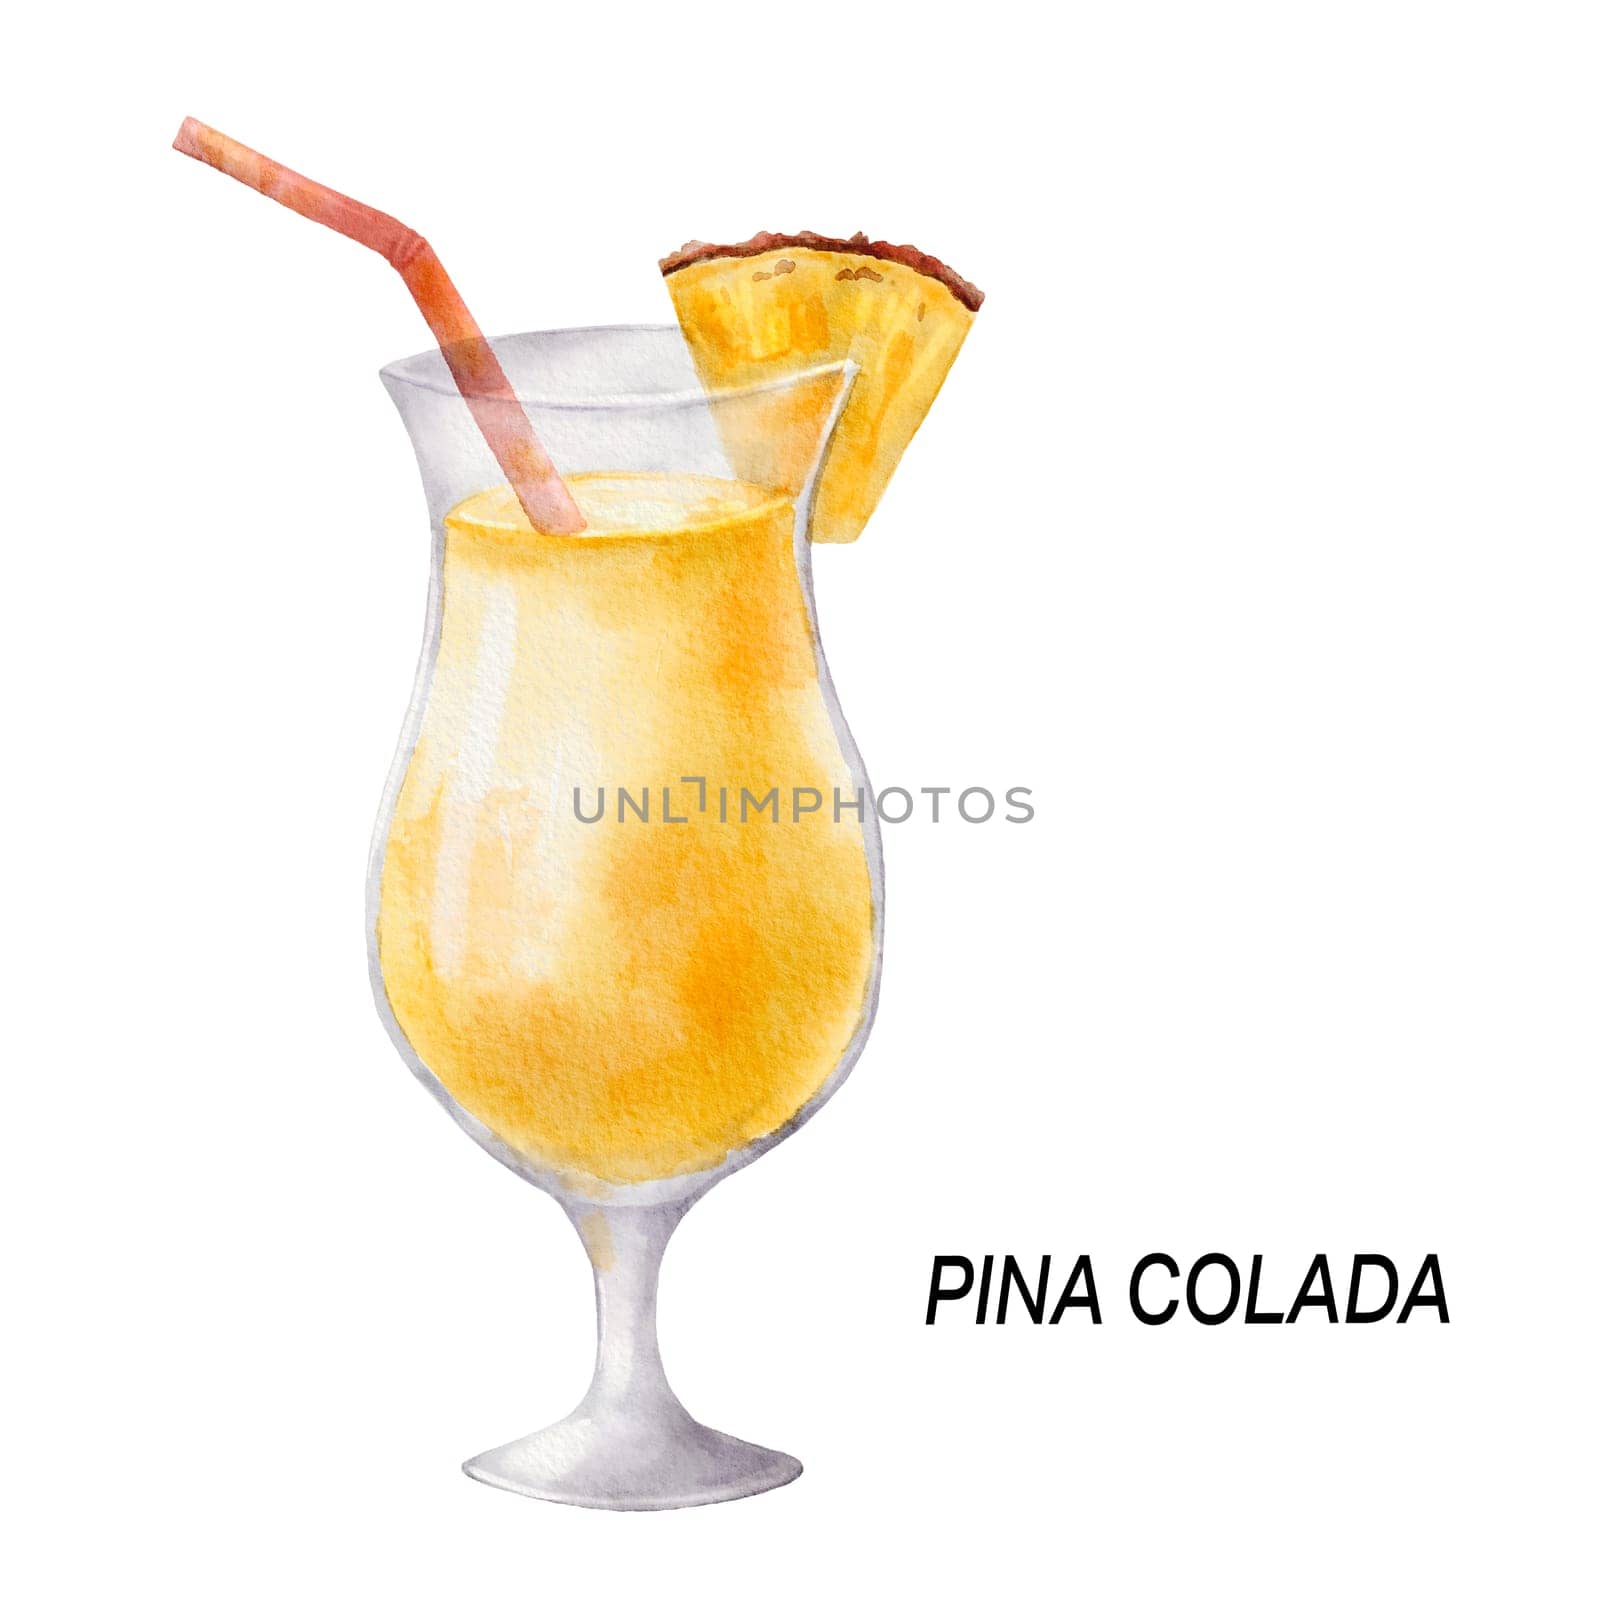 Pina colada cocktail. Watercolor illustration of drink in glass isolated on white by ElenaPlatova